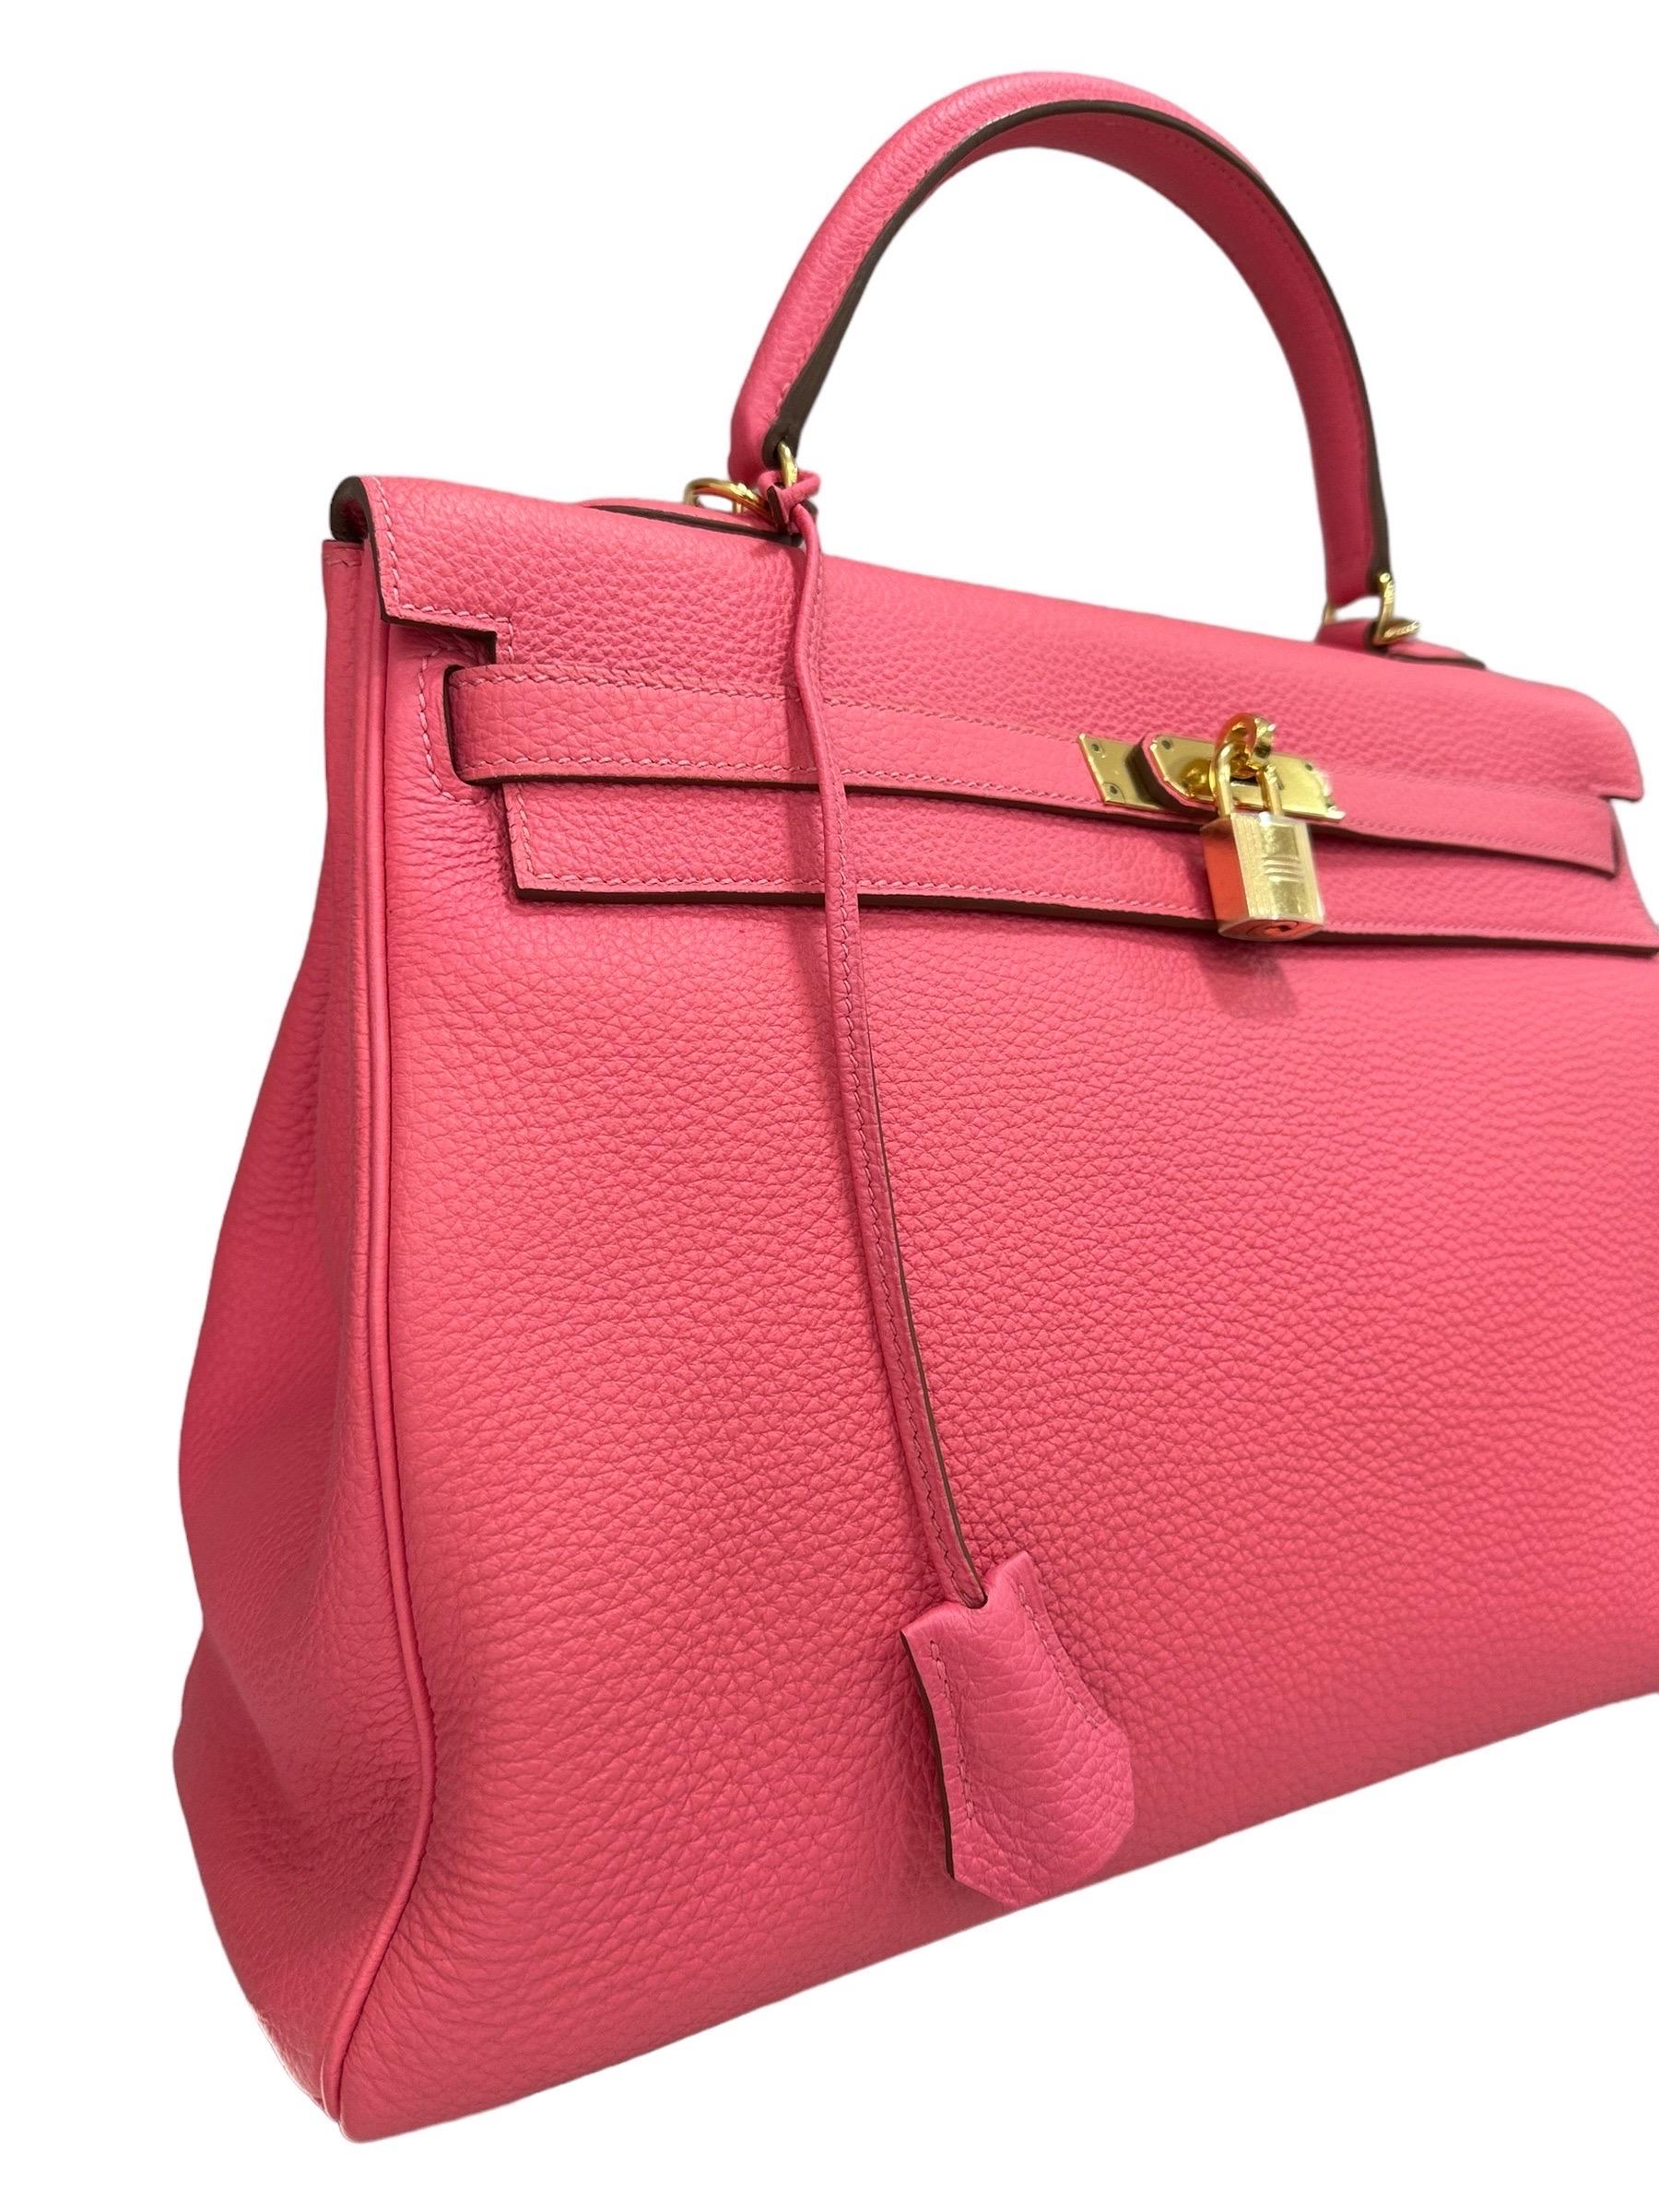 Hermès Kelly 35 Togo Rose Azalee Borsa A Tracolla In Excellent Condition For Sale In Torre Del Greco, IT